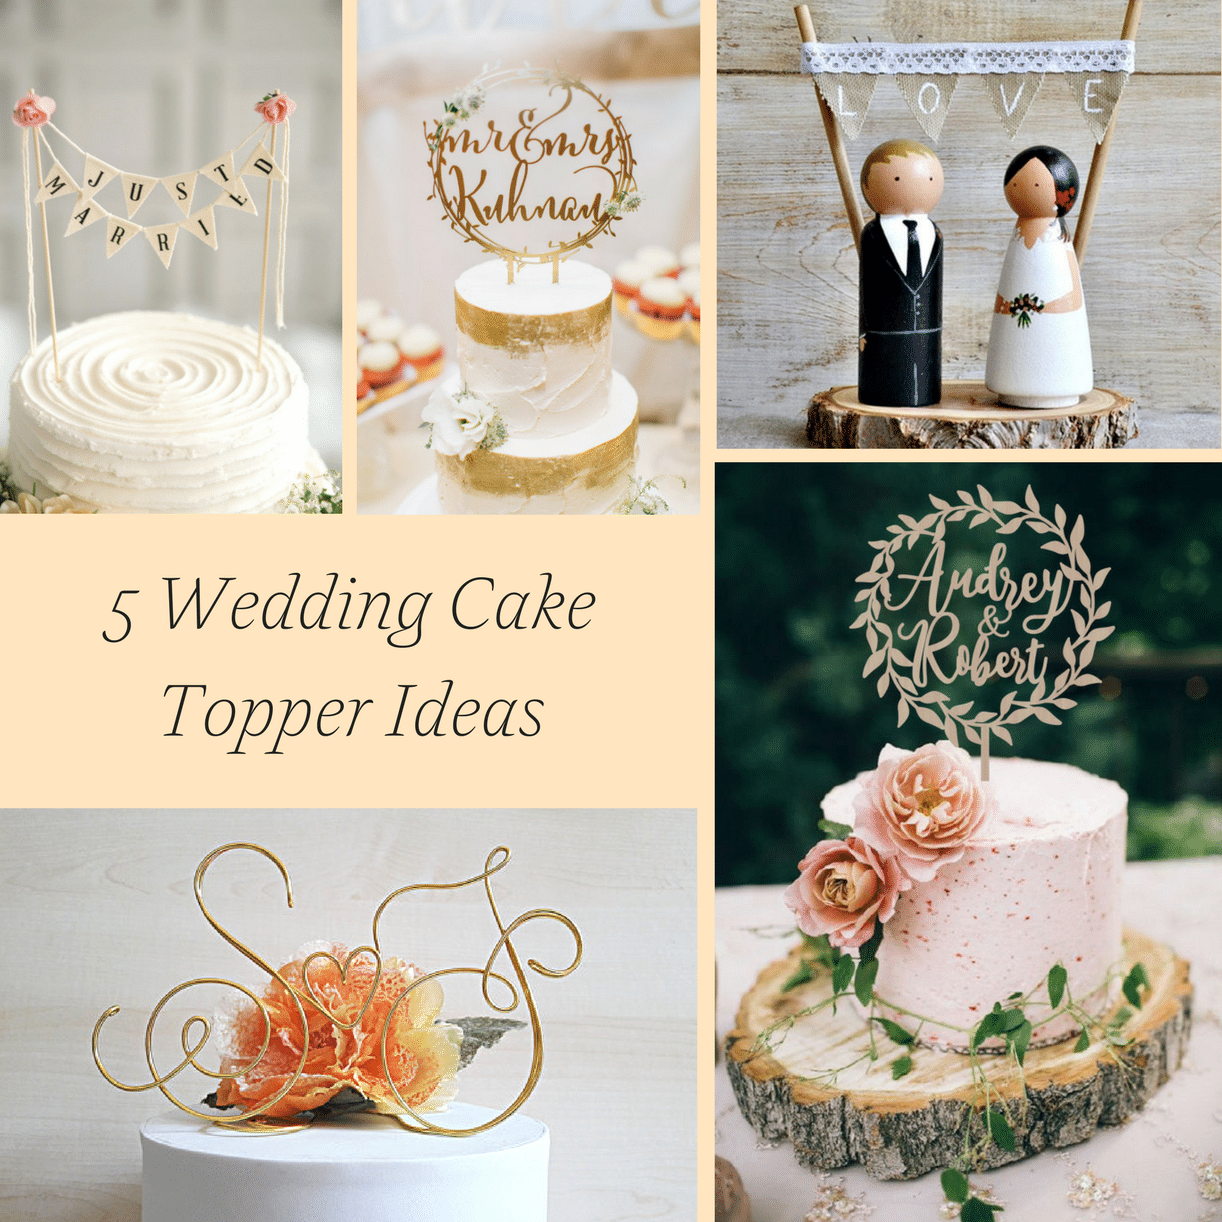 5 Wedding Cake Topper Ideas from Etsy as seen on Hill City Bride